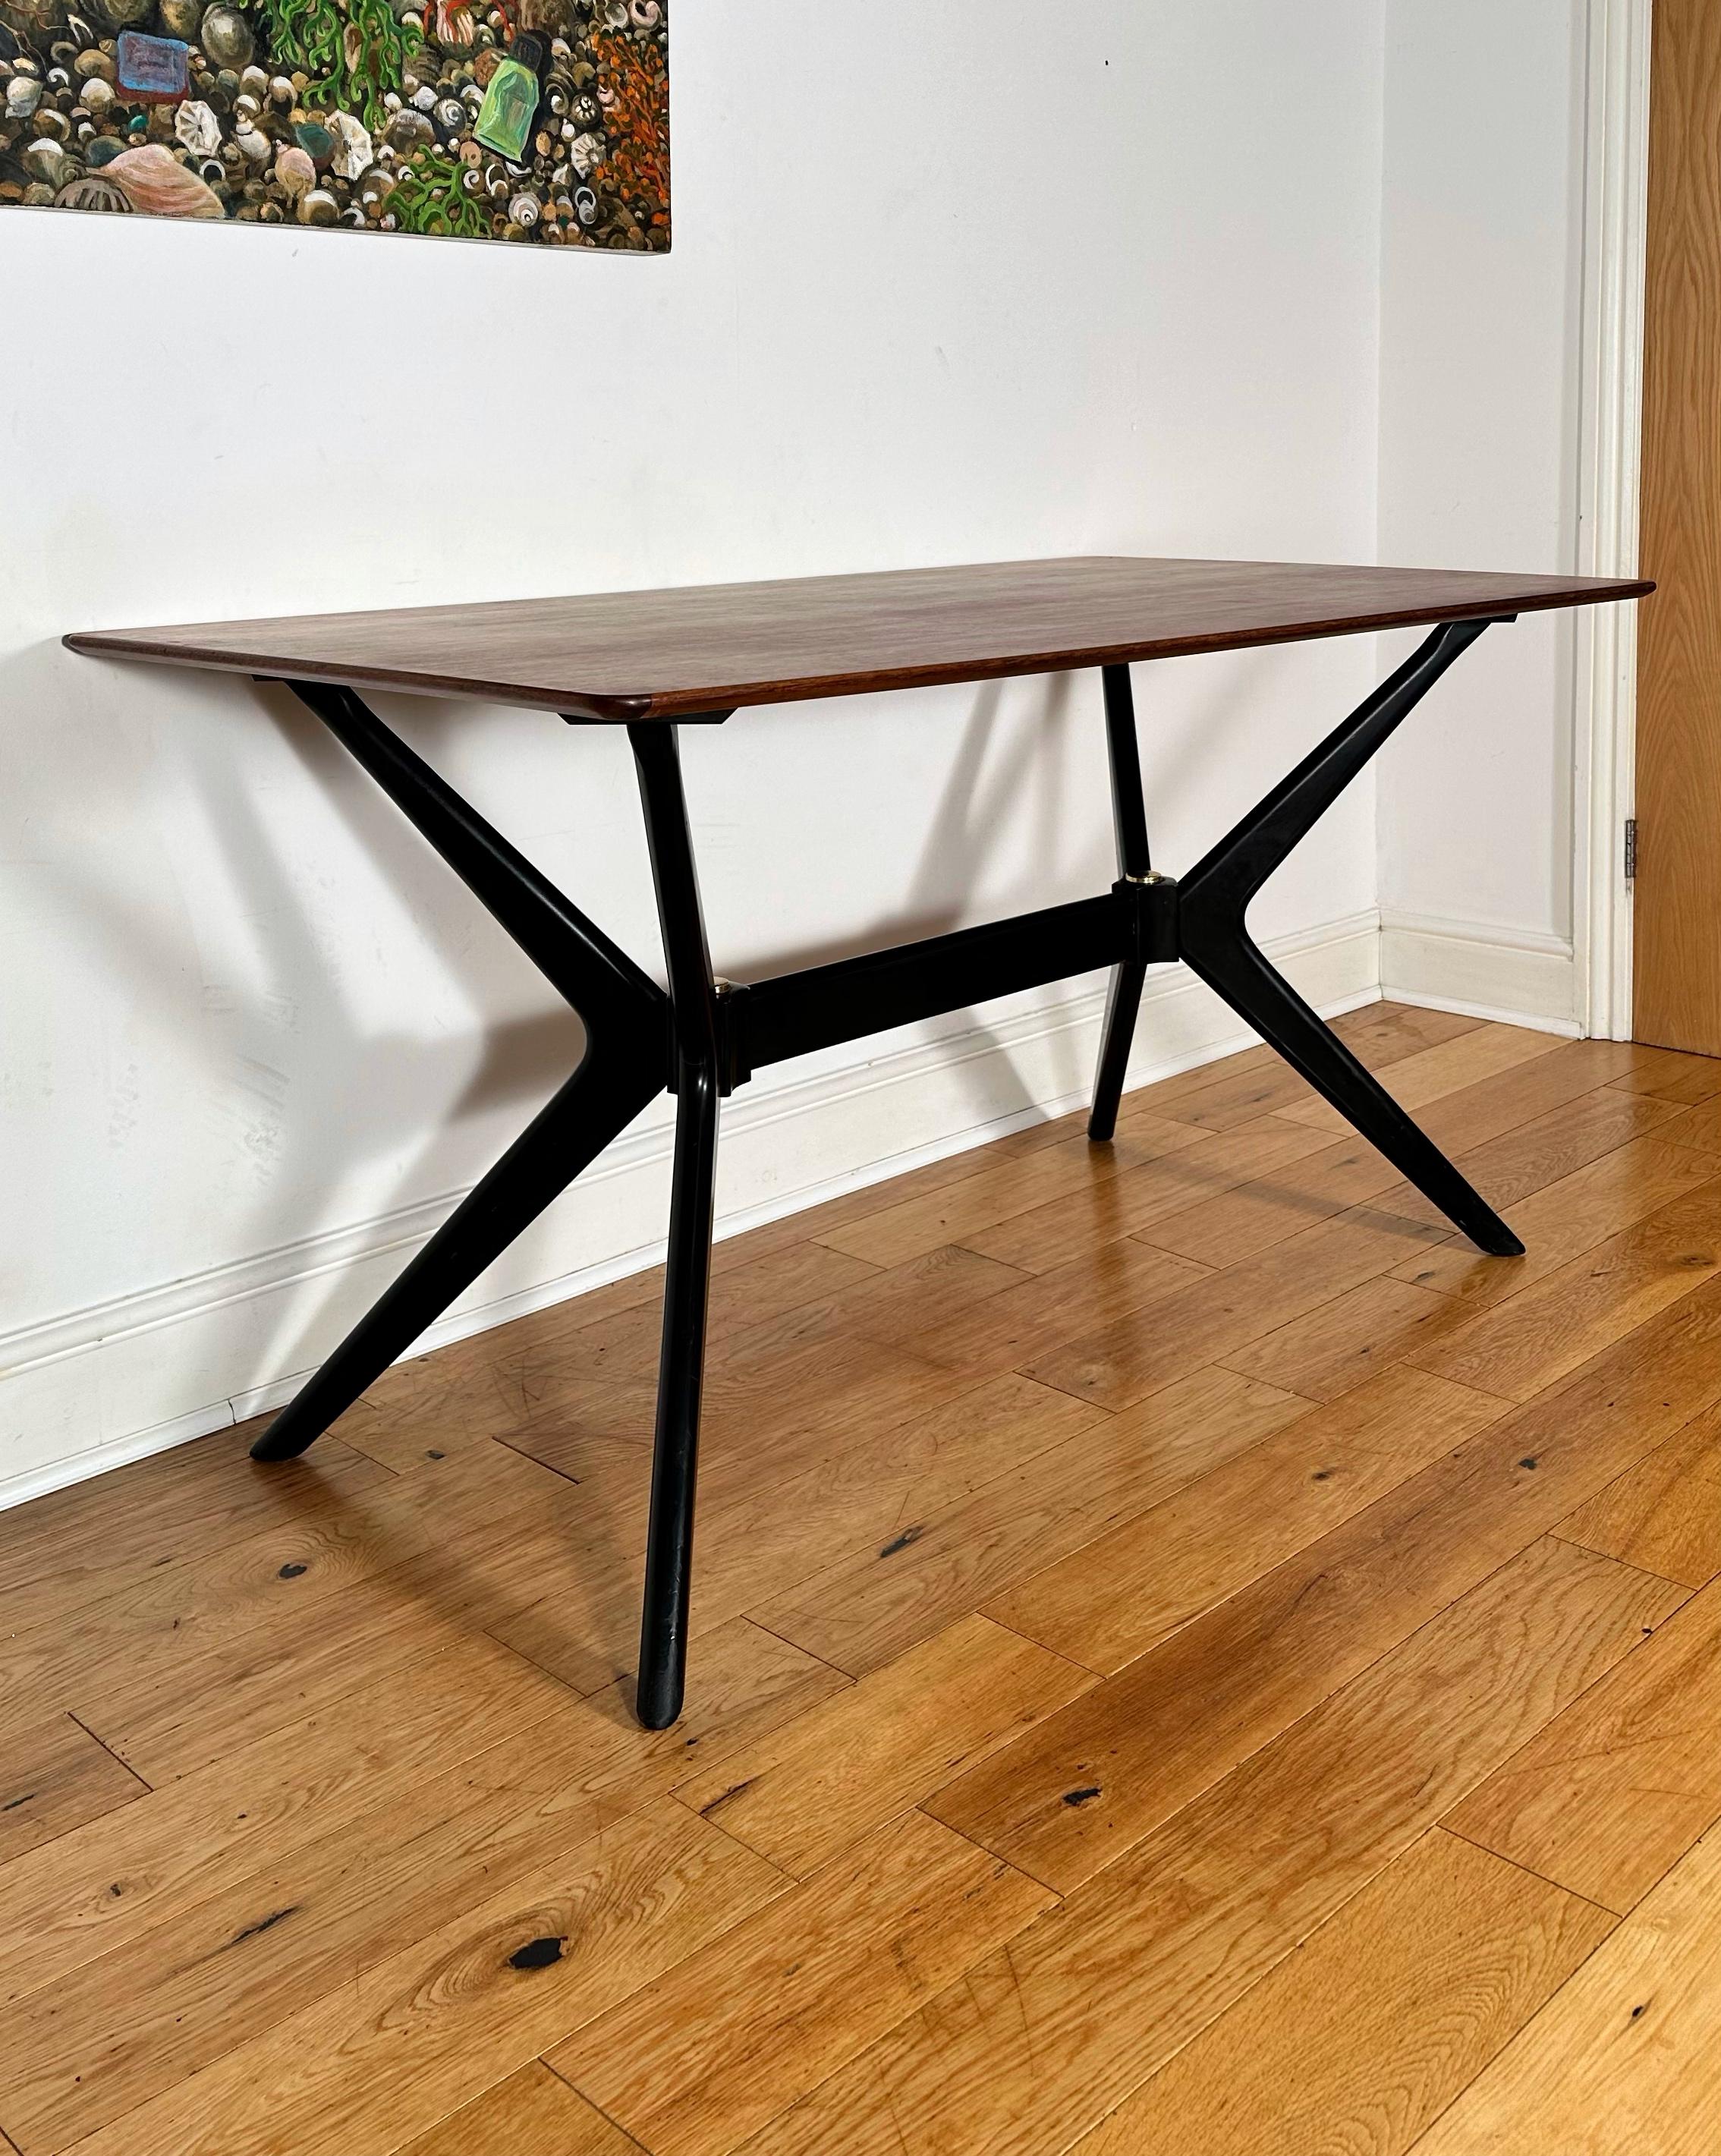 We’re happy to provide our own competitive shipping quotes with trusted couriers. Please message us with your postcode for a more accurate price. Thank you.

Very rare Mid Century Modern ‘Helicopter’ dining table. Designed in the early 1960’s by E